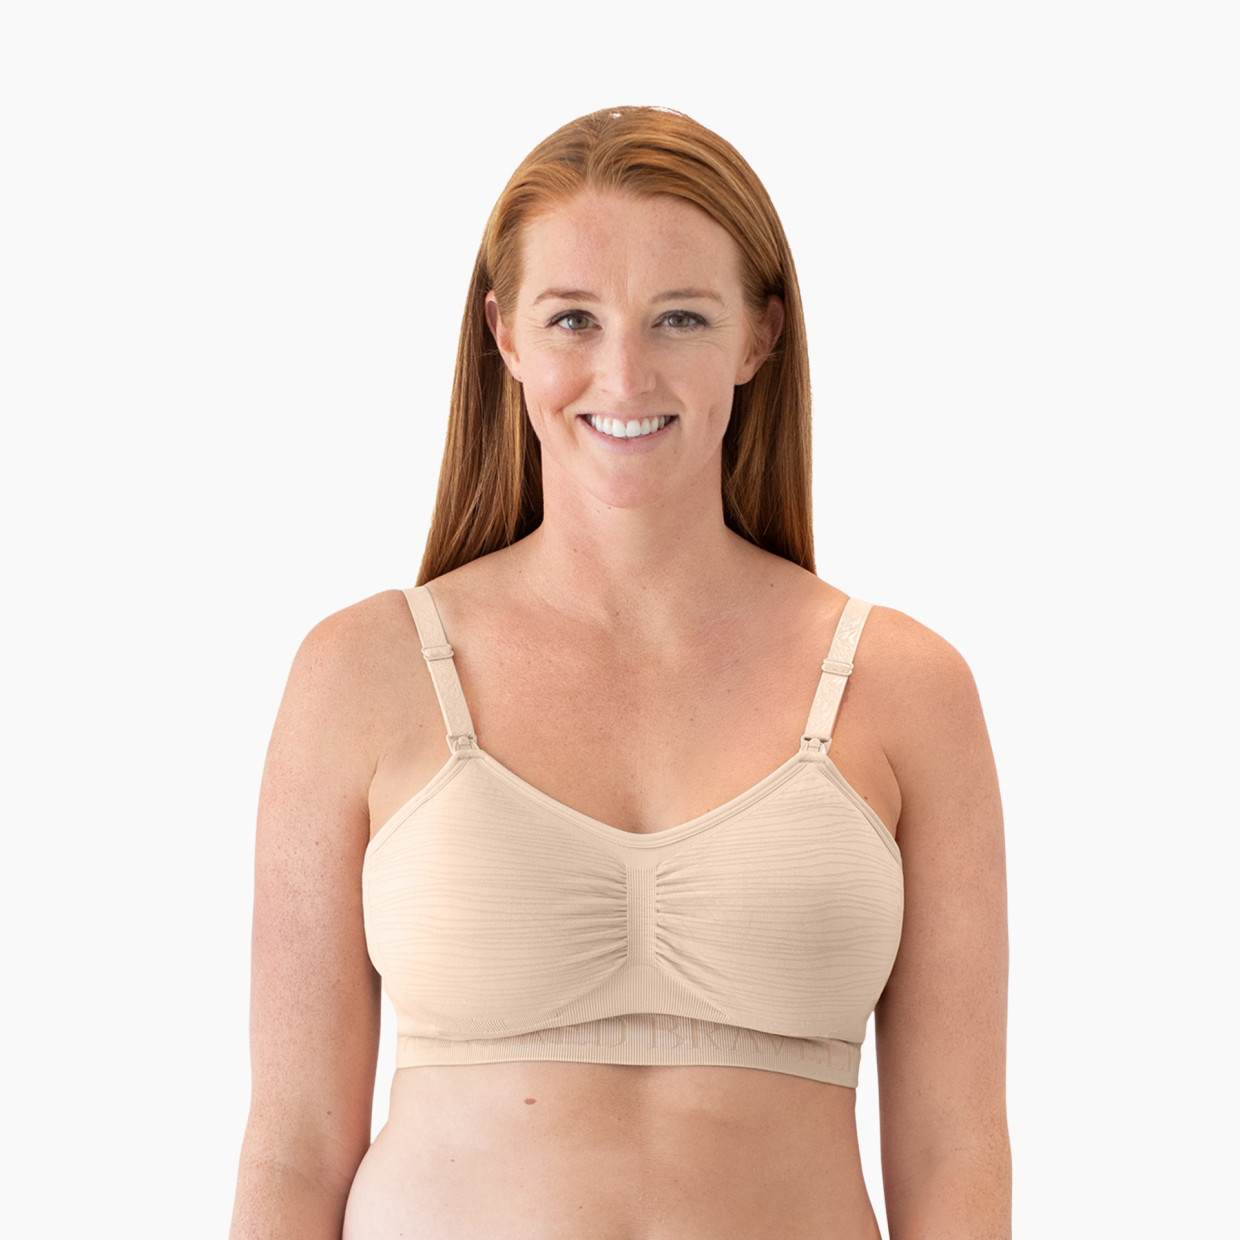 Kindred Bravely Sublime Hands Free Pumping Bra - Beige, Xxx-Large.